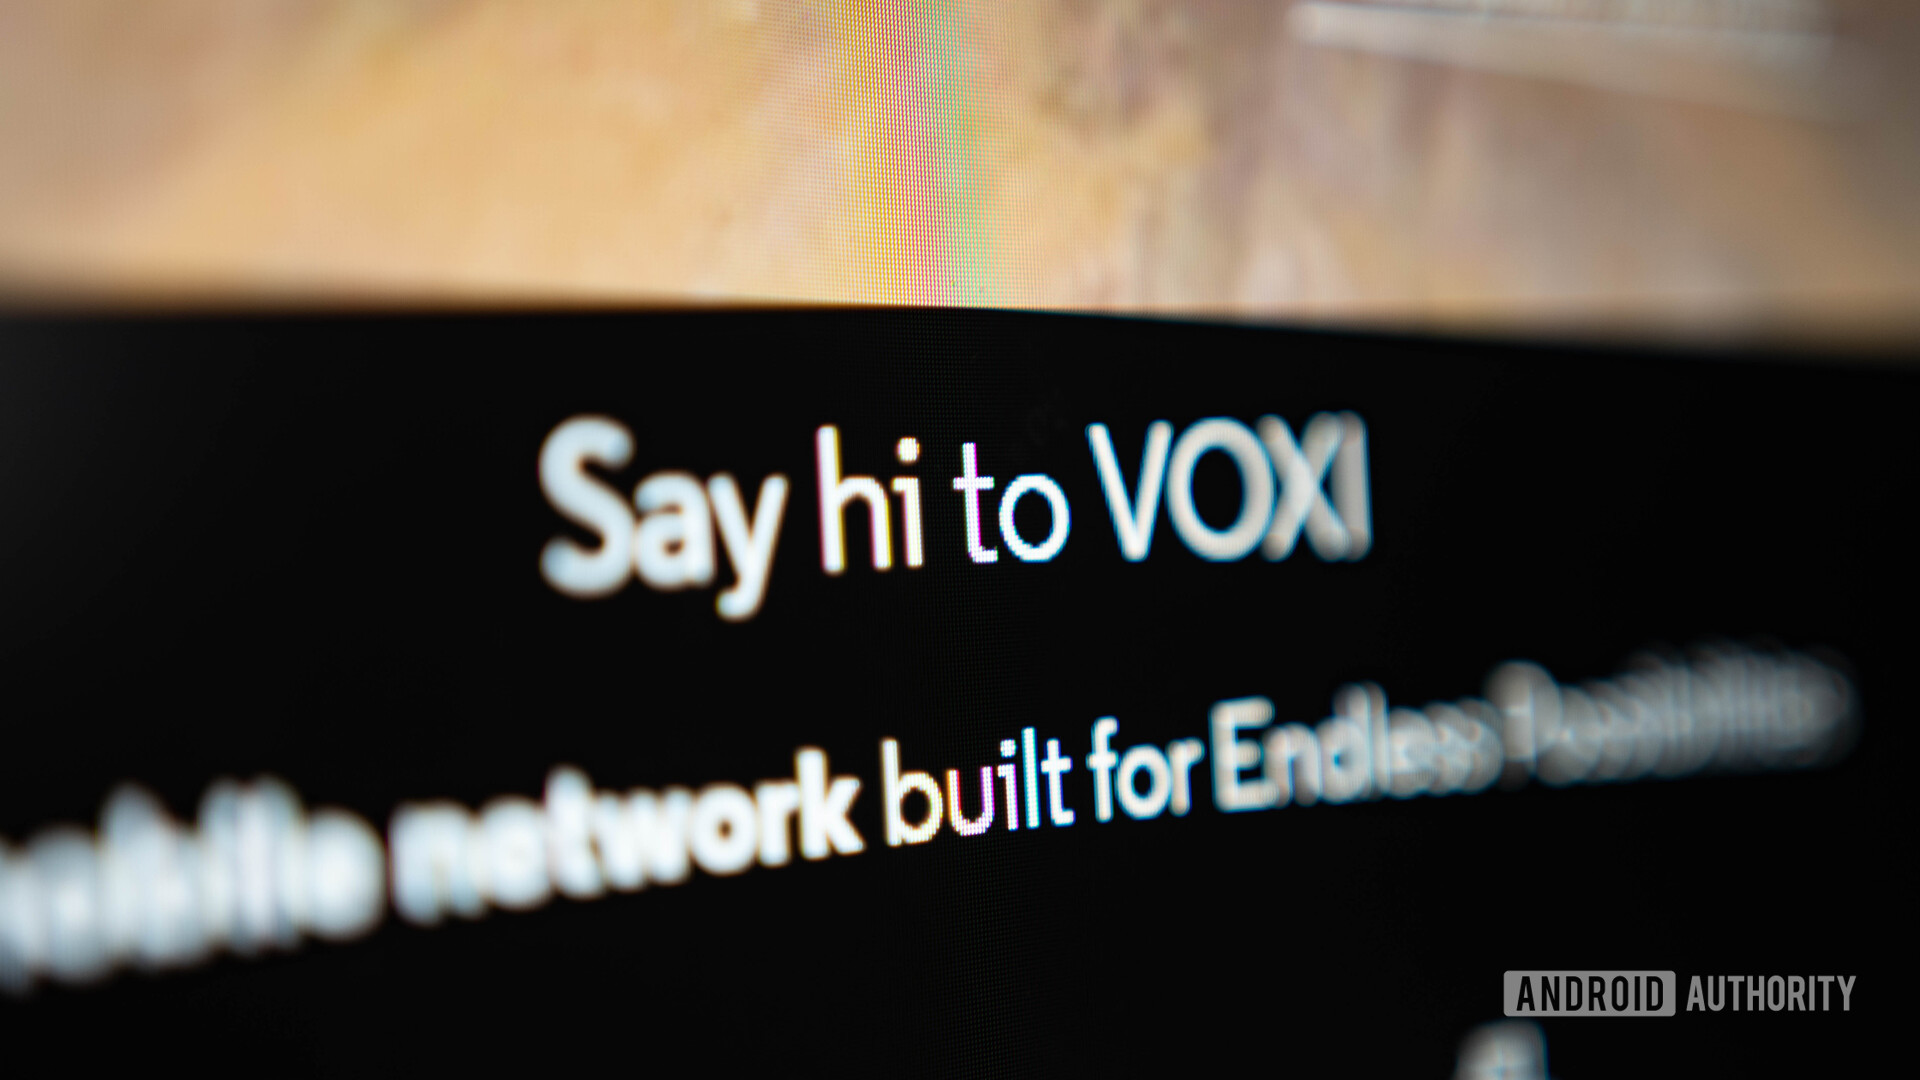 Say hi to voxi on their website